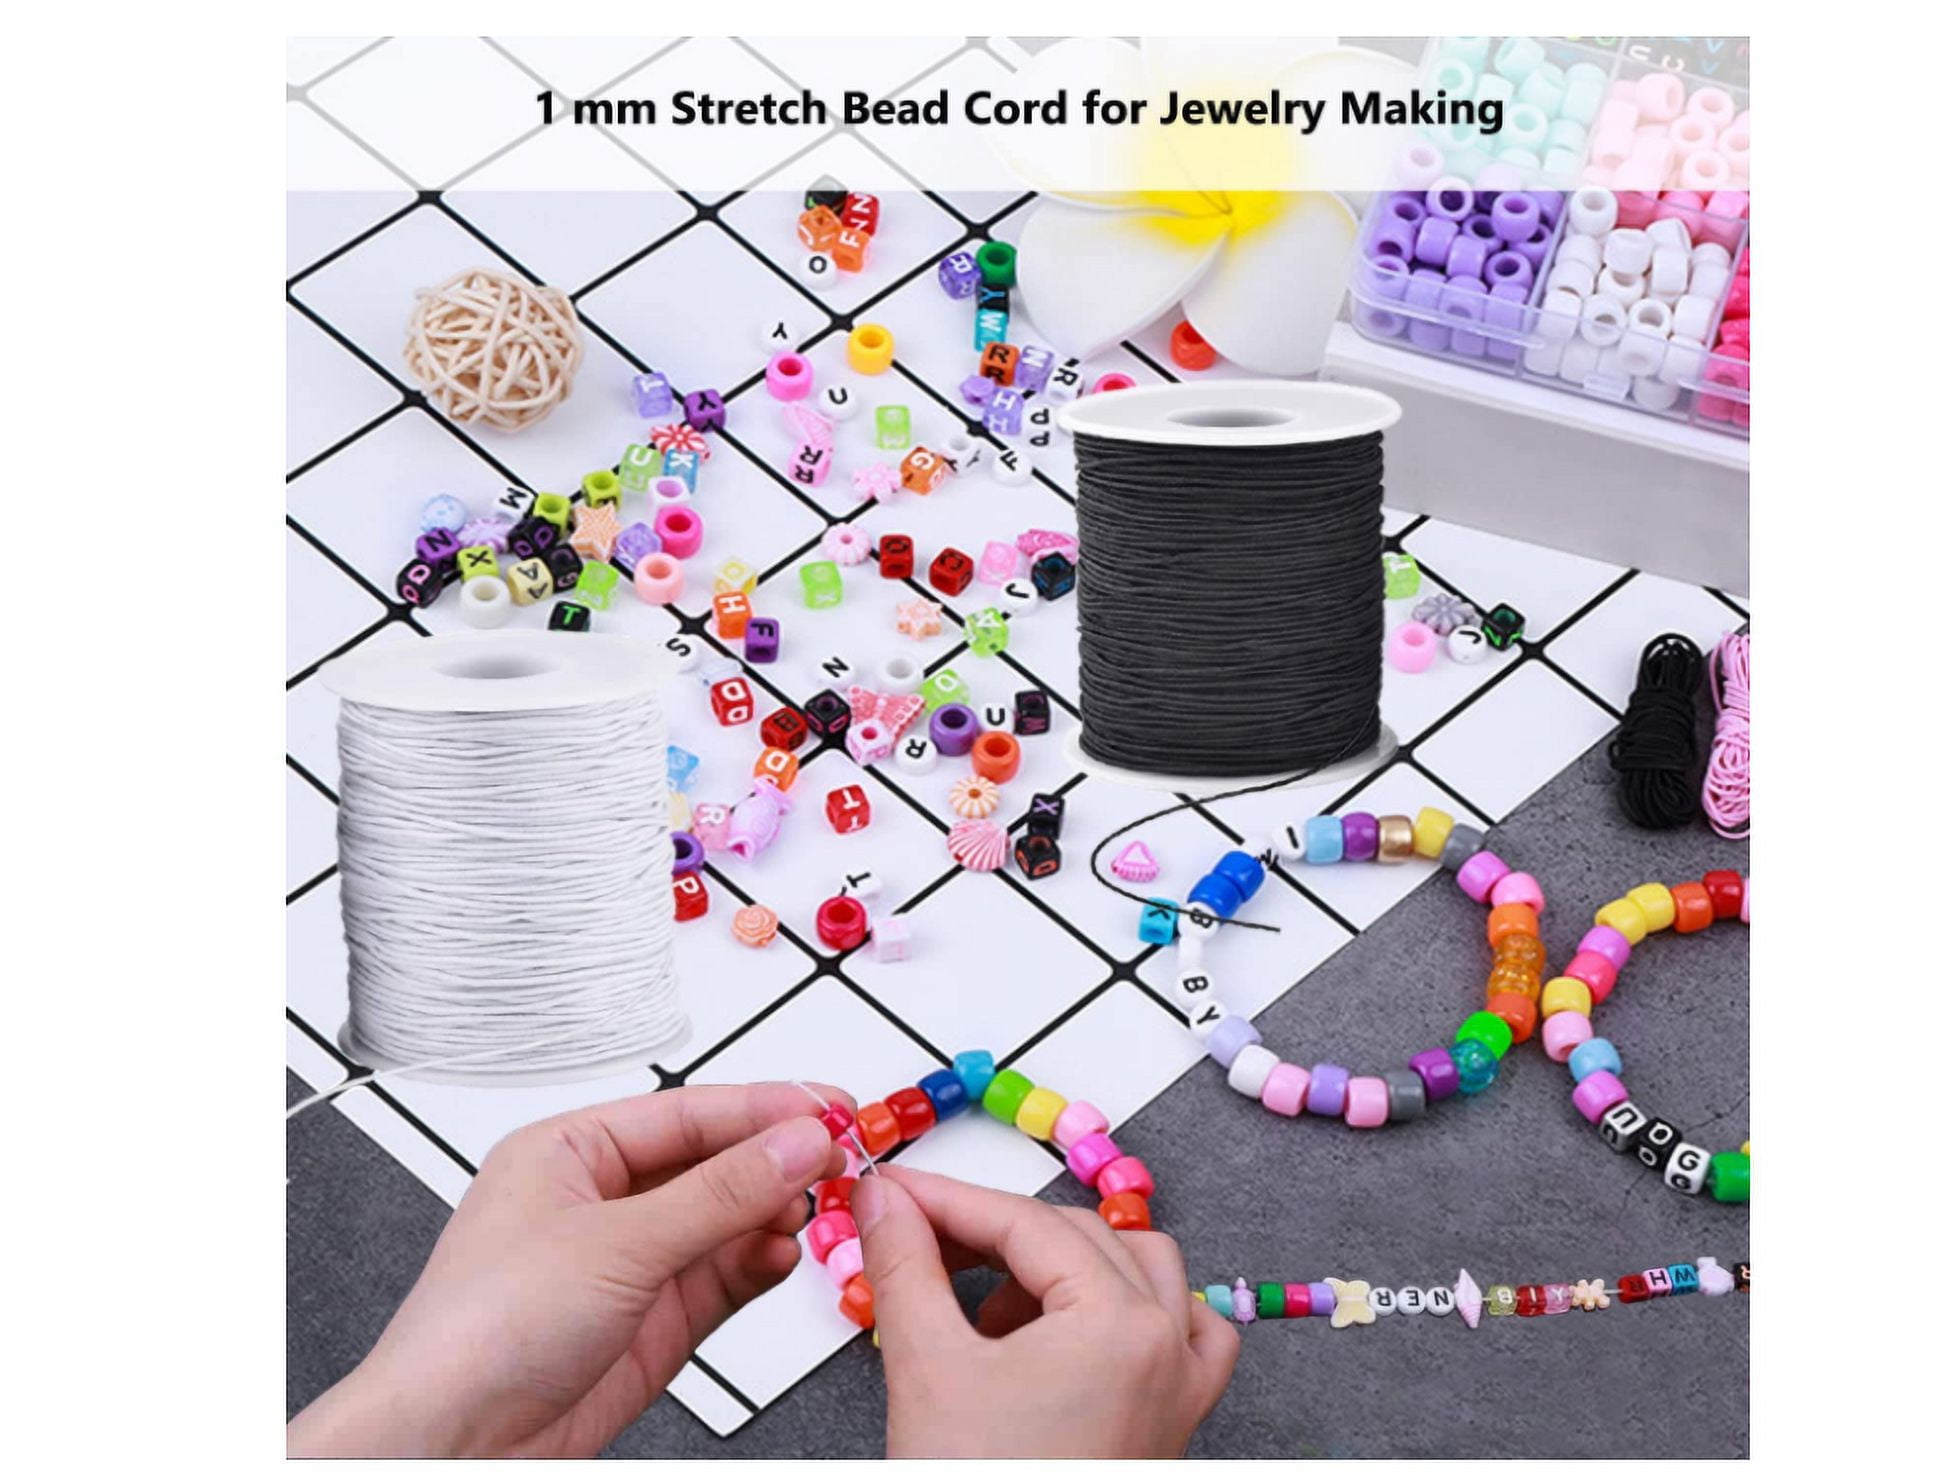  2 Rolls 1 mm Elastic Beading Cord for Bracelet Stretchy Elastic  String for Jewelry Making Sewing Necklace 100 Meters Elastic Bracelets Cord  Crafts Beading Thread DIY Crafting Cord (Black + White)